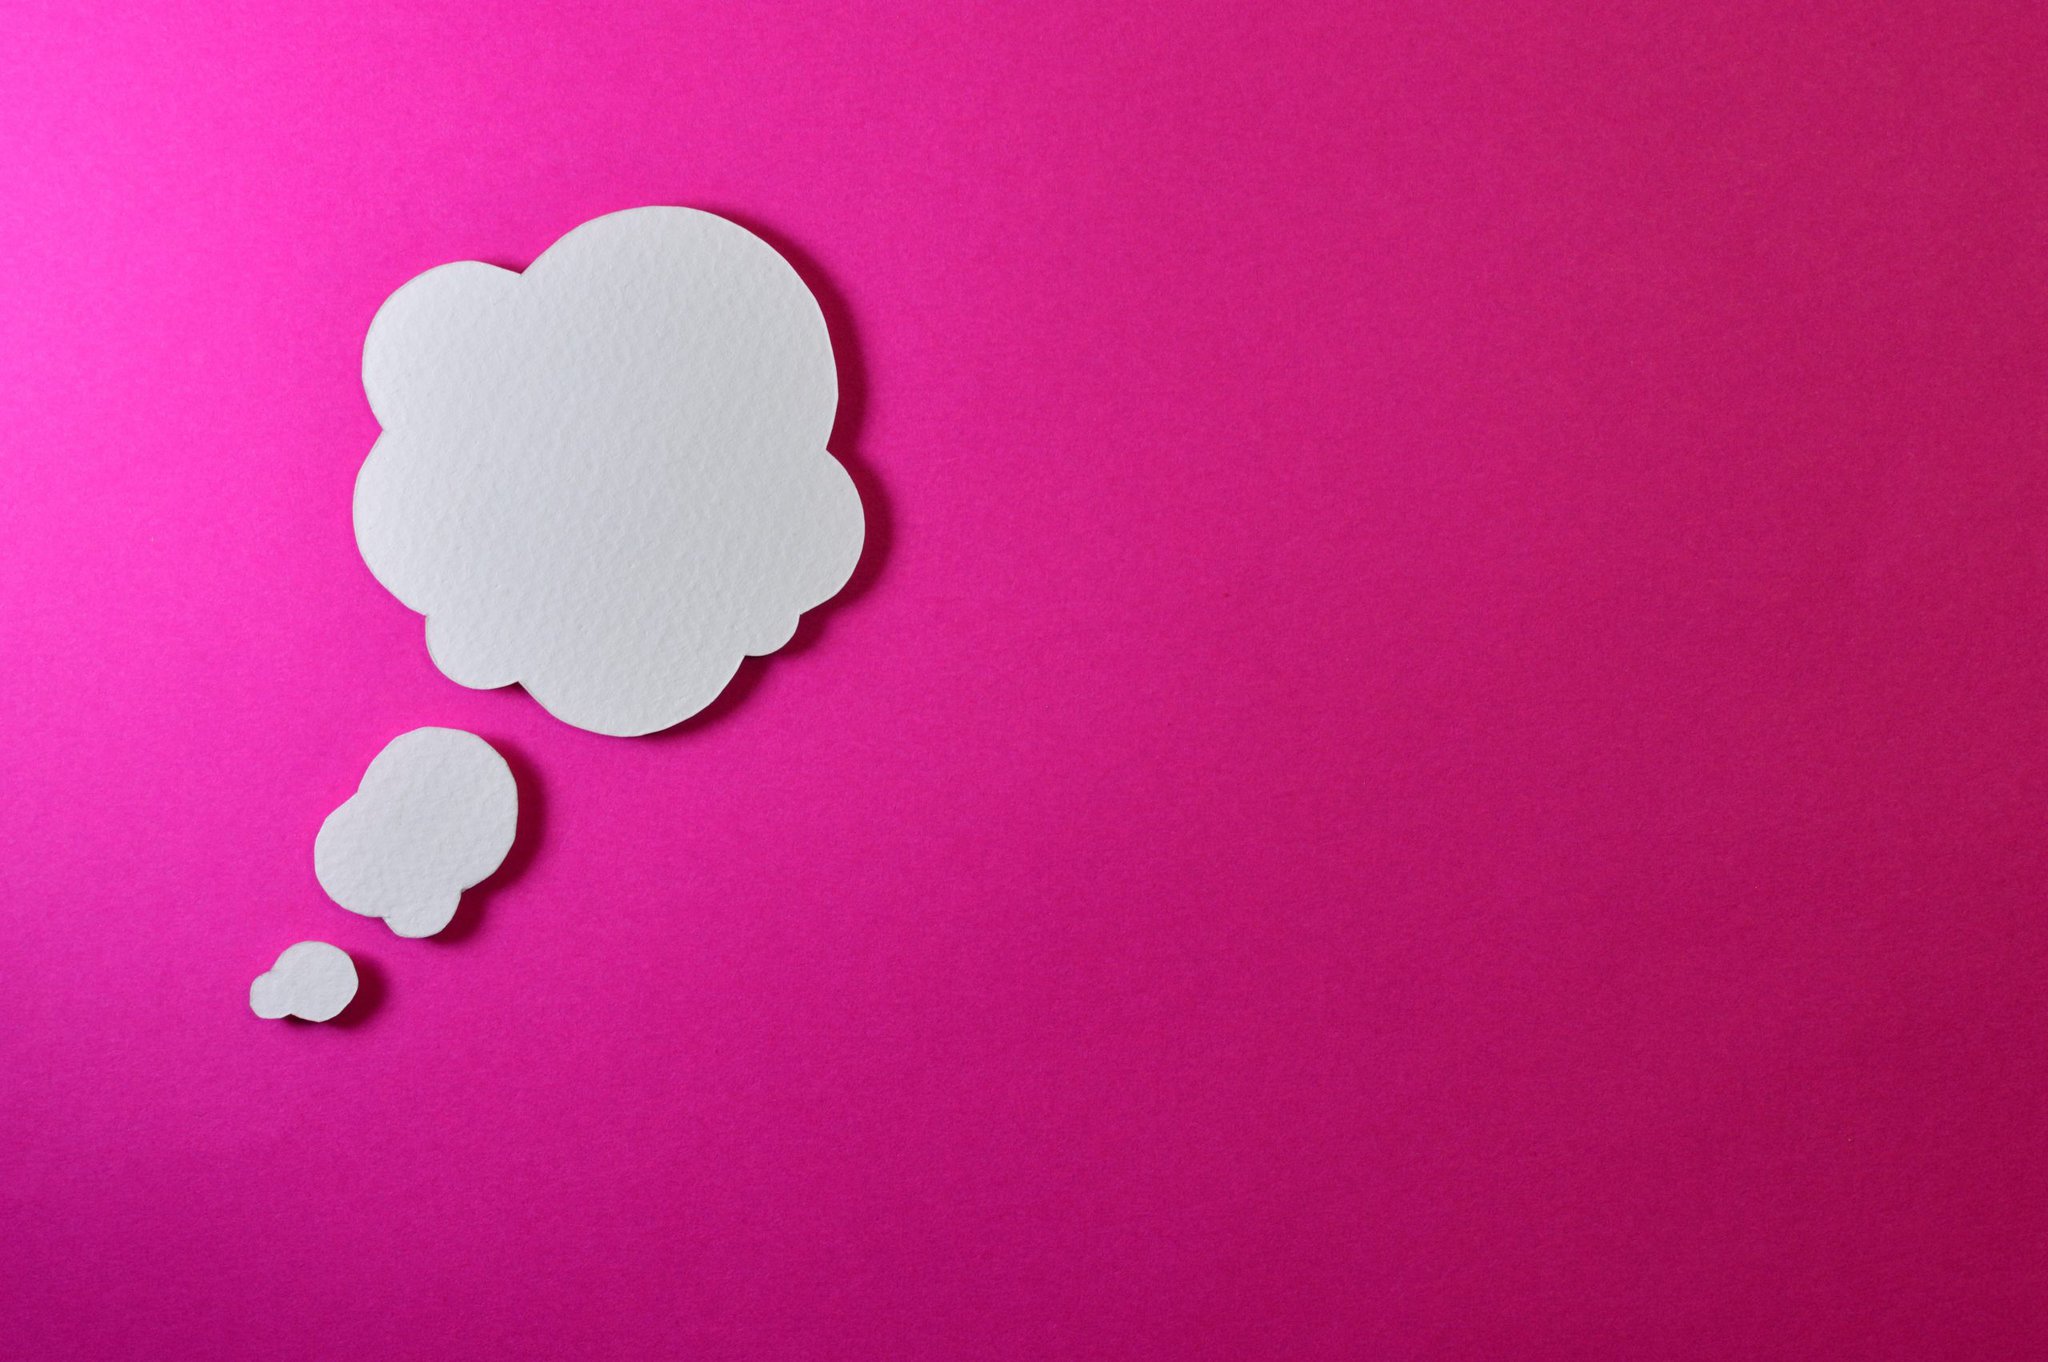 pink background with white bubble roe v wade VENTUREWRITE blog https://www.pexels.com/photo/white-bubble-illustration-1111372/